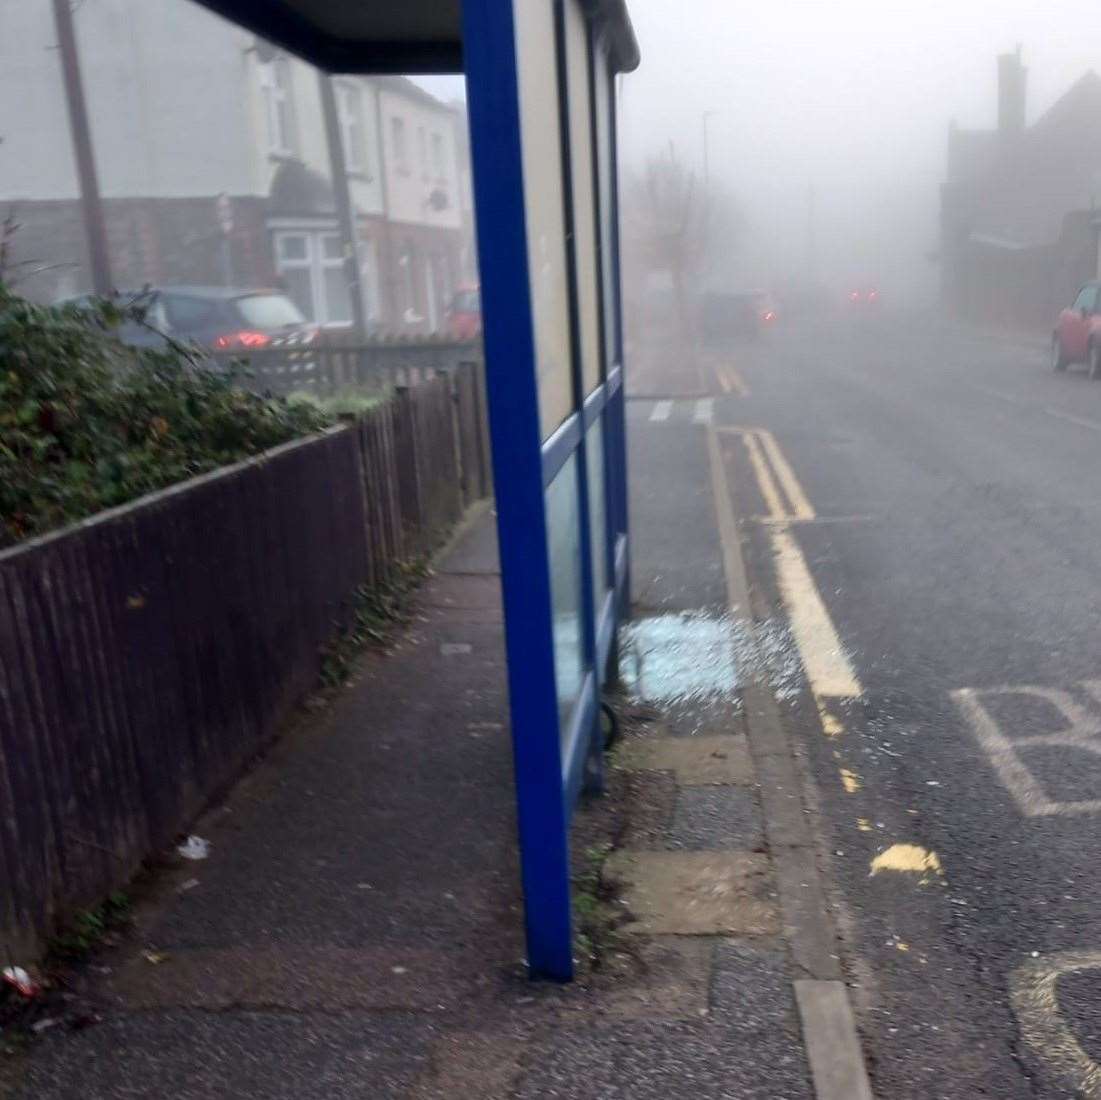 At least five bus shelters on the island have been damaged. Picture: Zoë Swarbrick